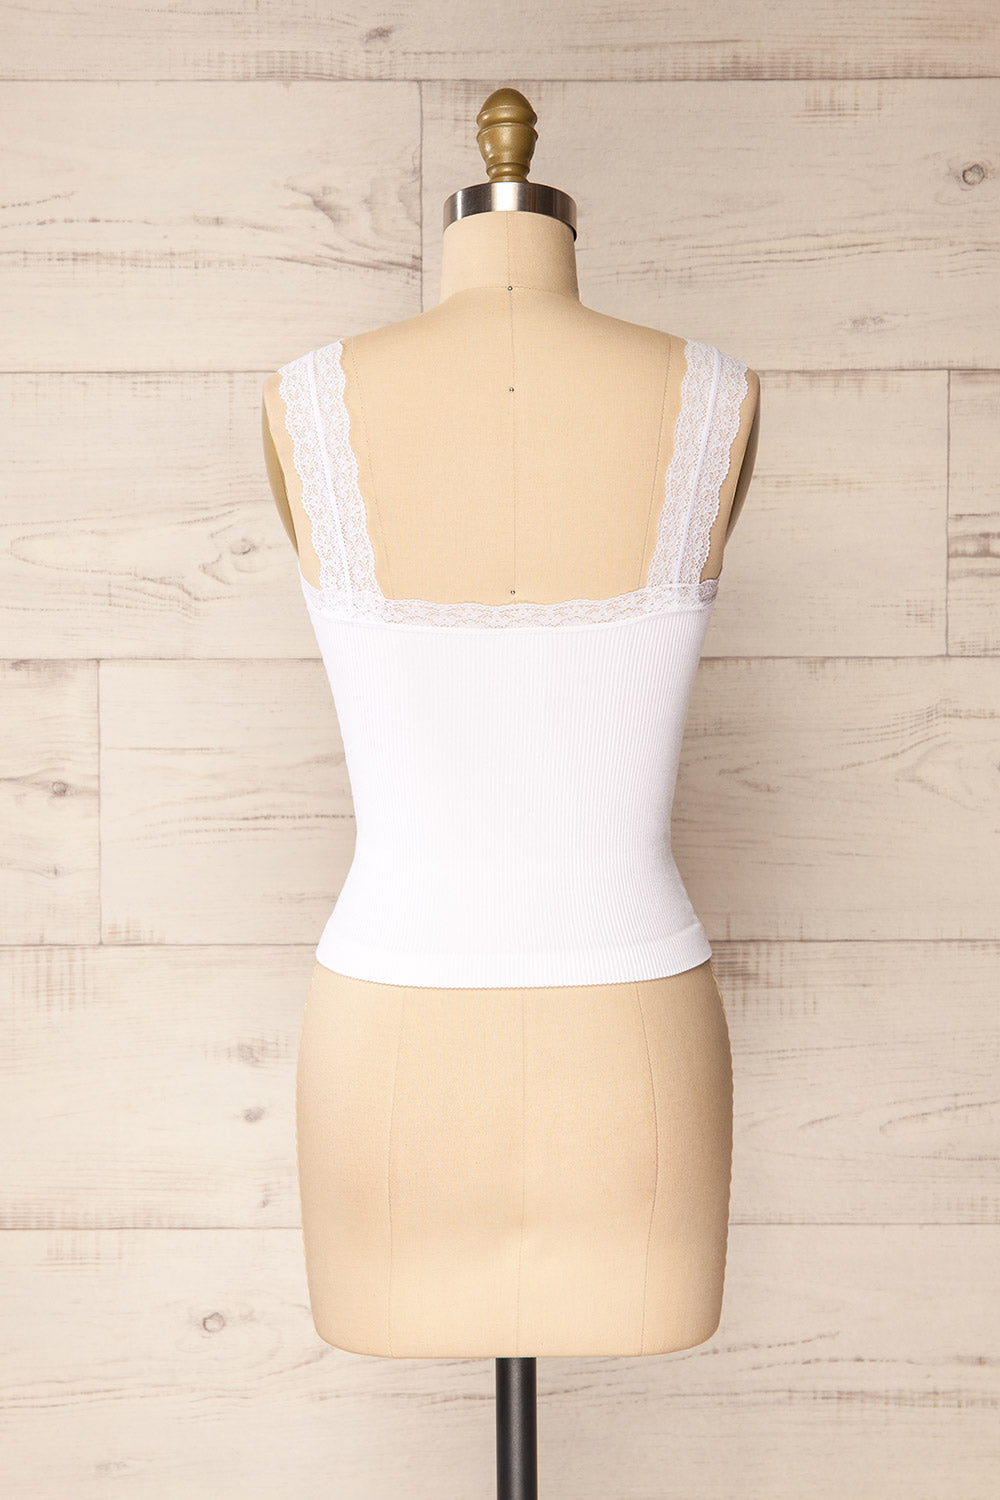 Somensac White Ribbed Camisole w/ Lace Trim | Boutique 1861 back view